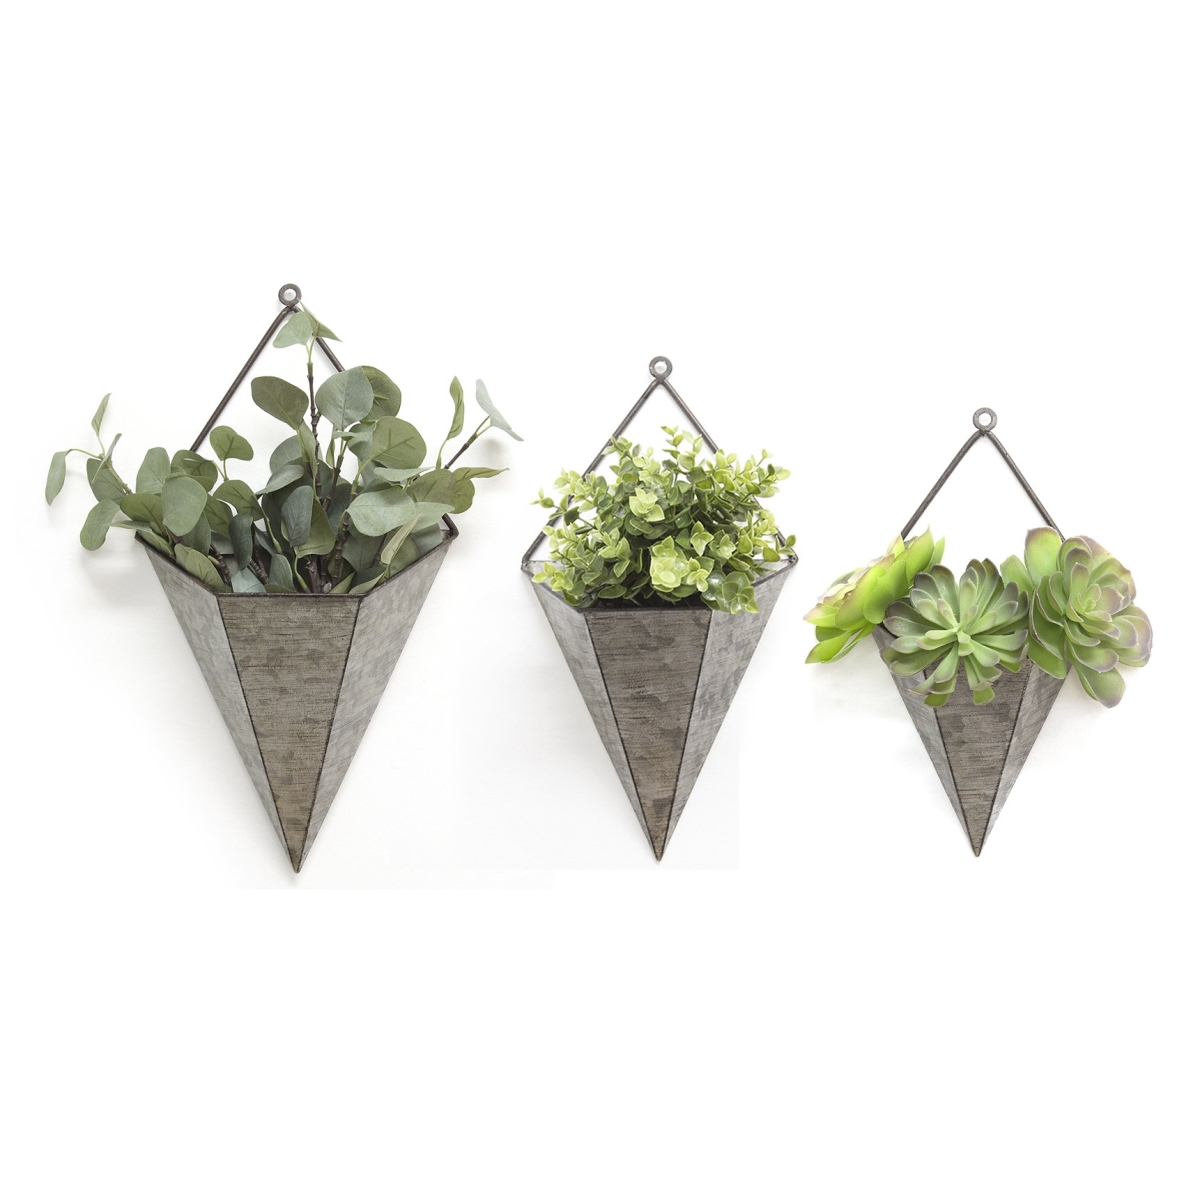 Home Roots 321168 Triangular Galvanized Wall Planters - 3 Piece